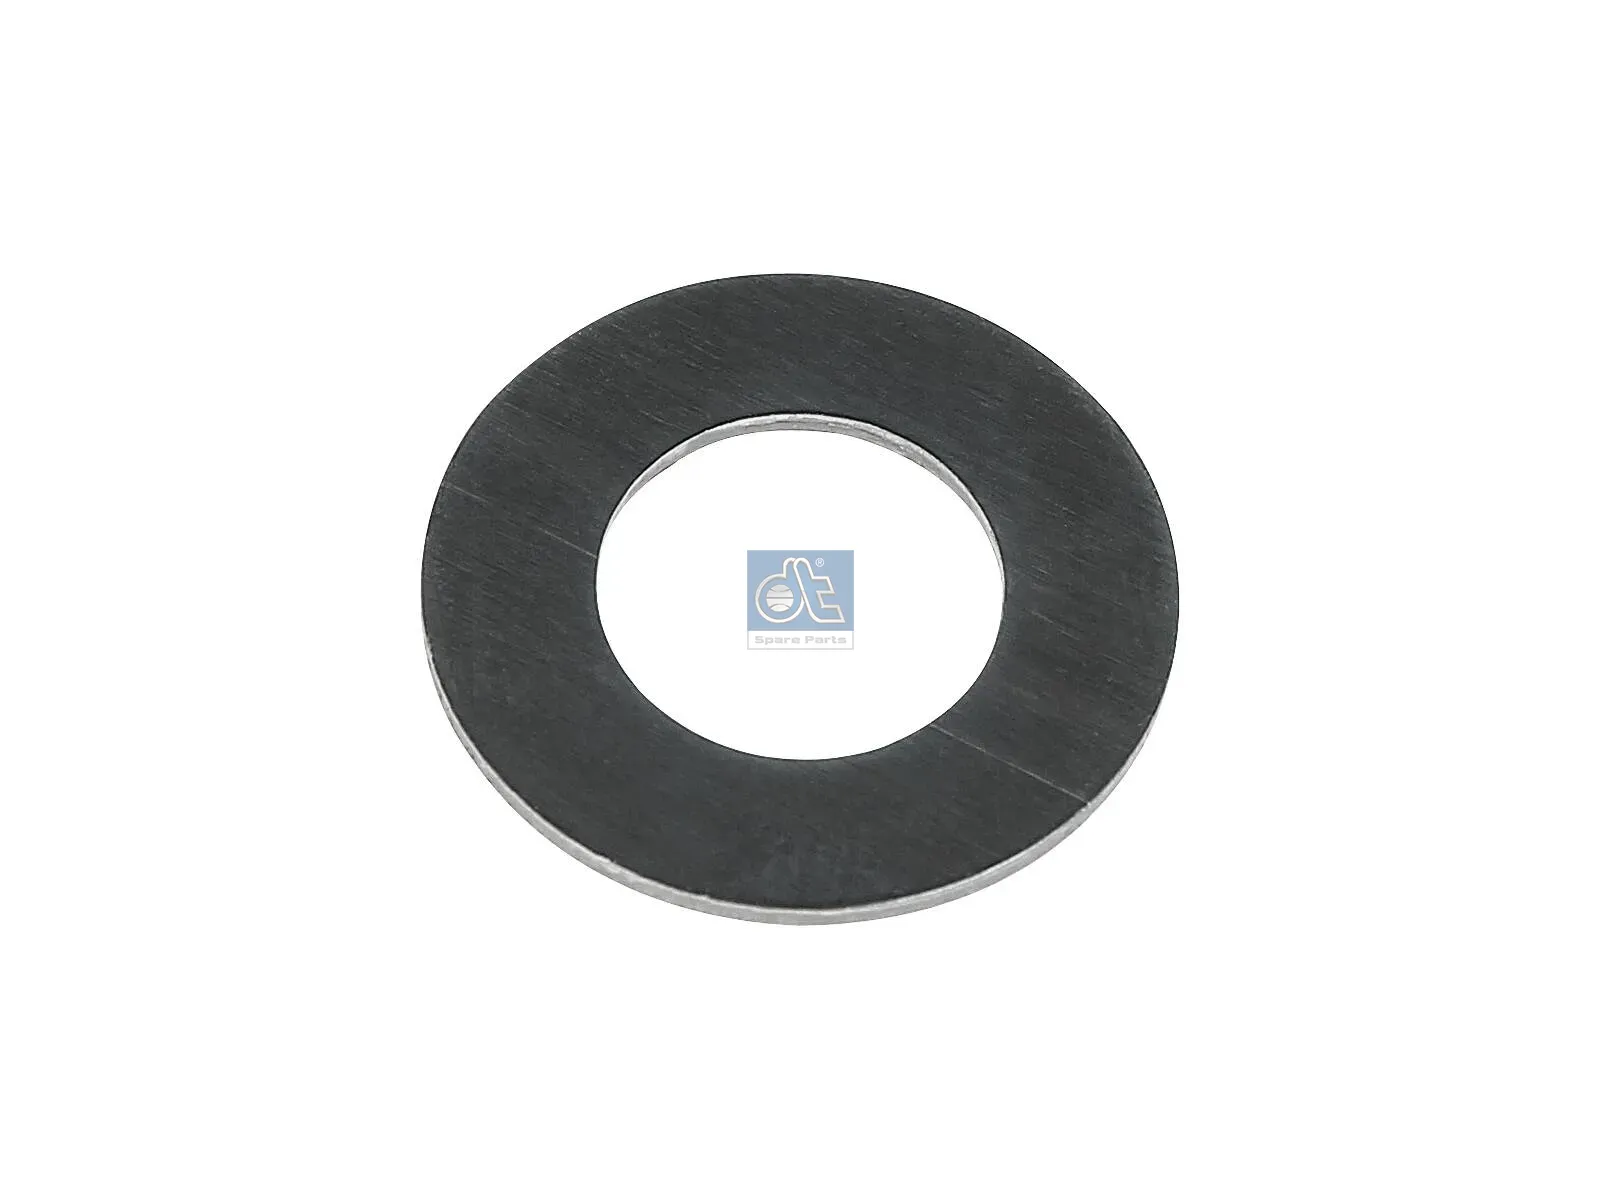 Axial washer